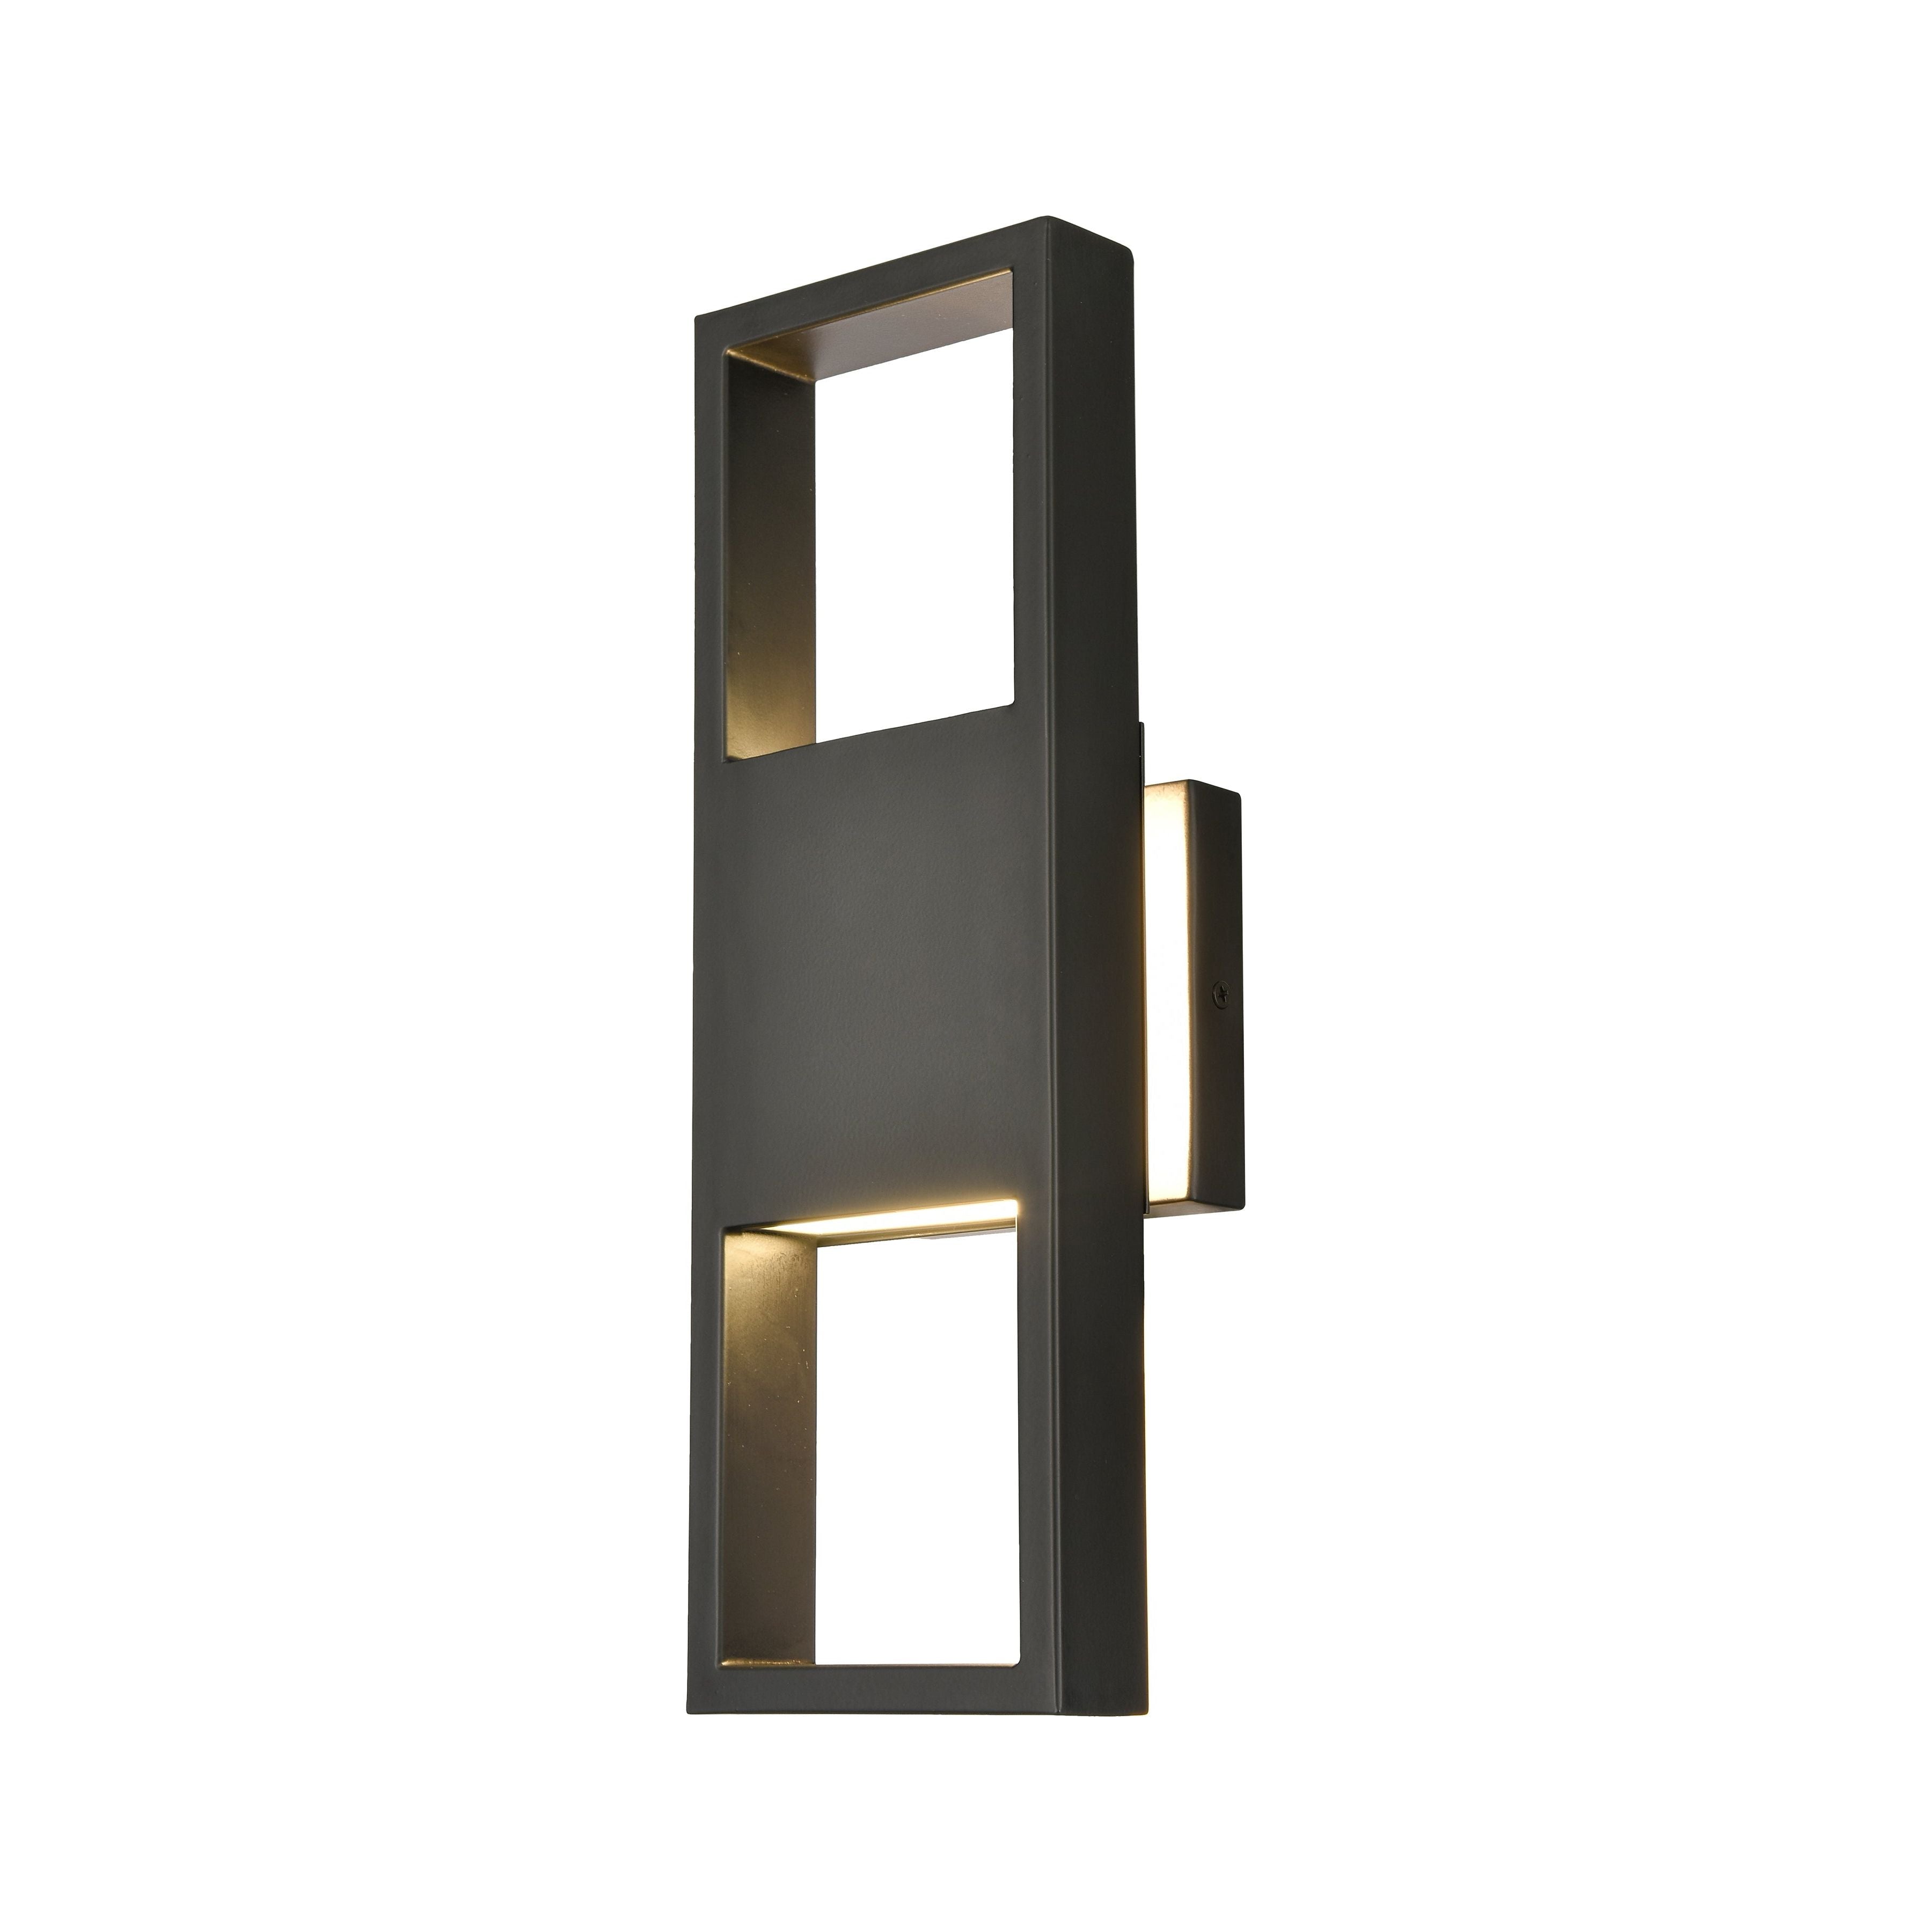 Reflection Point 15" High LED Outdoor Sconce